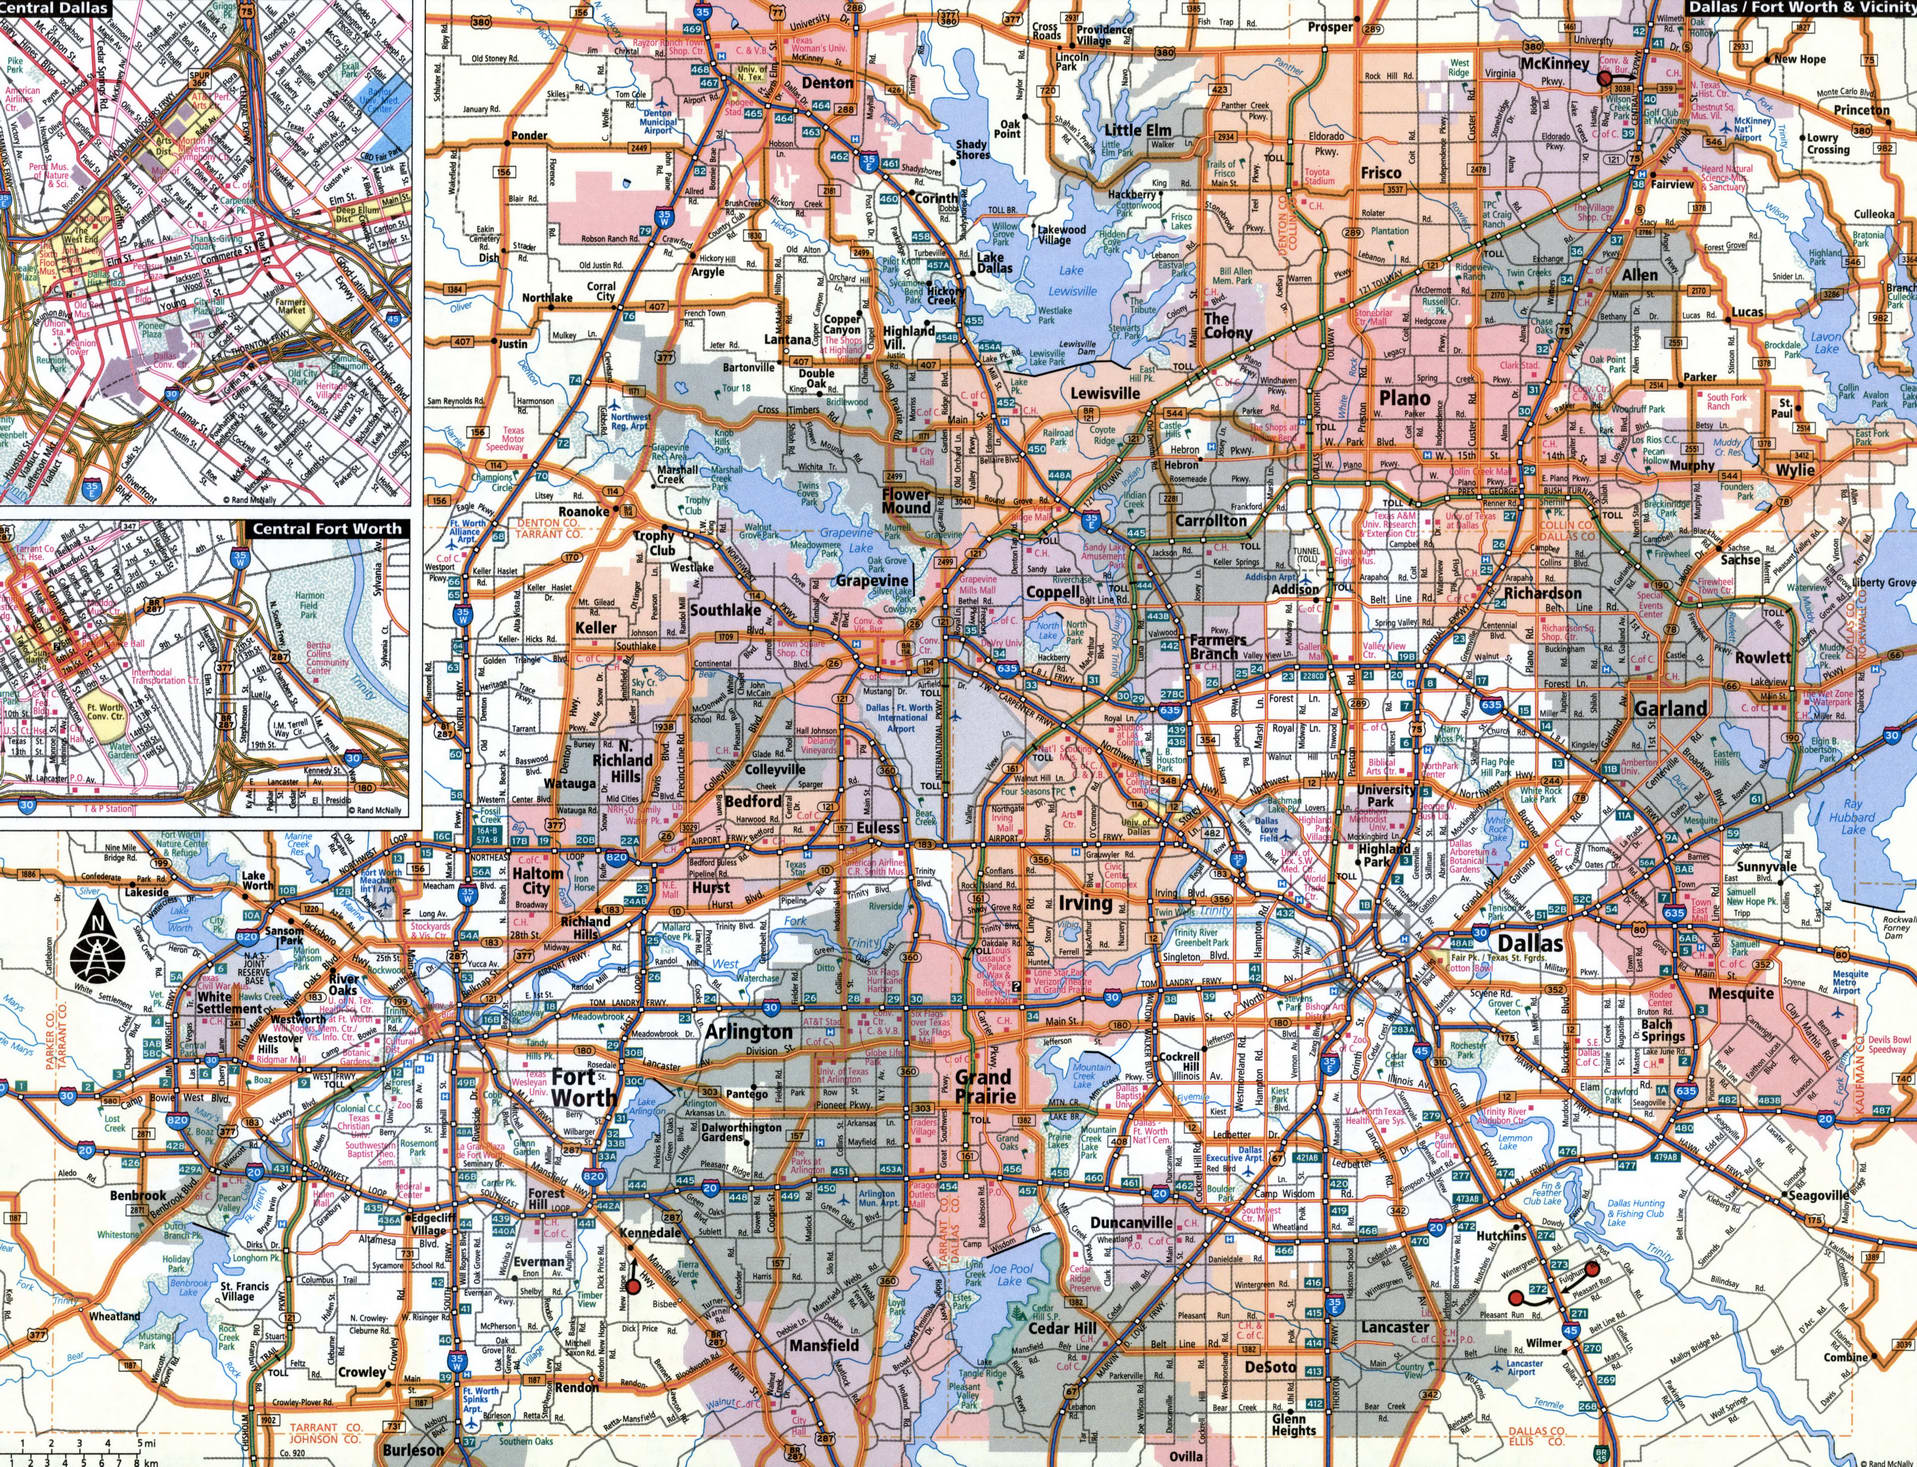 Dallas city map for truckers